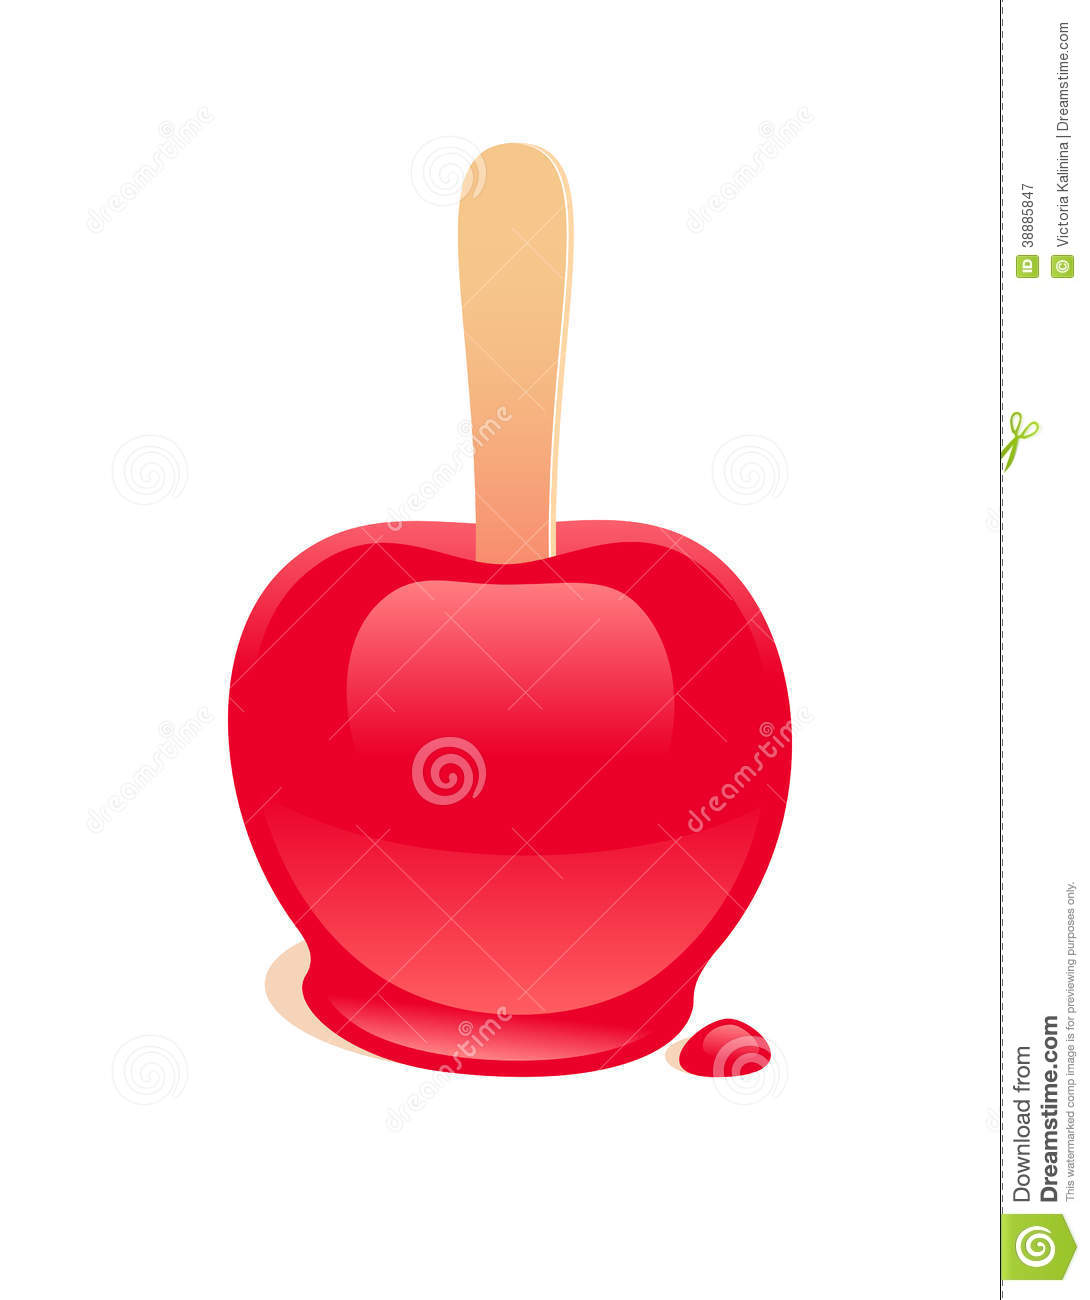 Candy Apple Stock Vector   Image  38885847